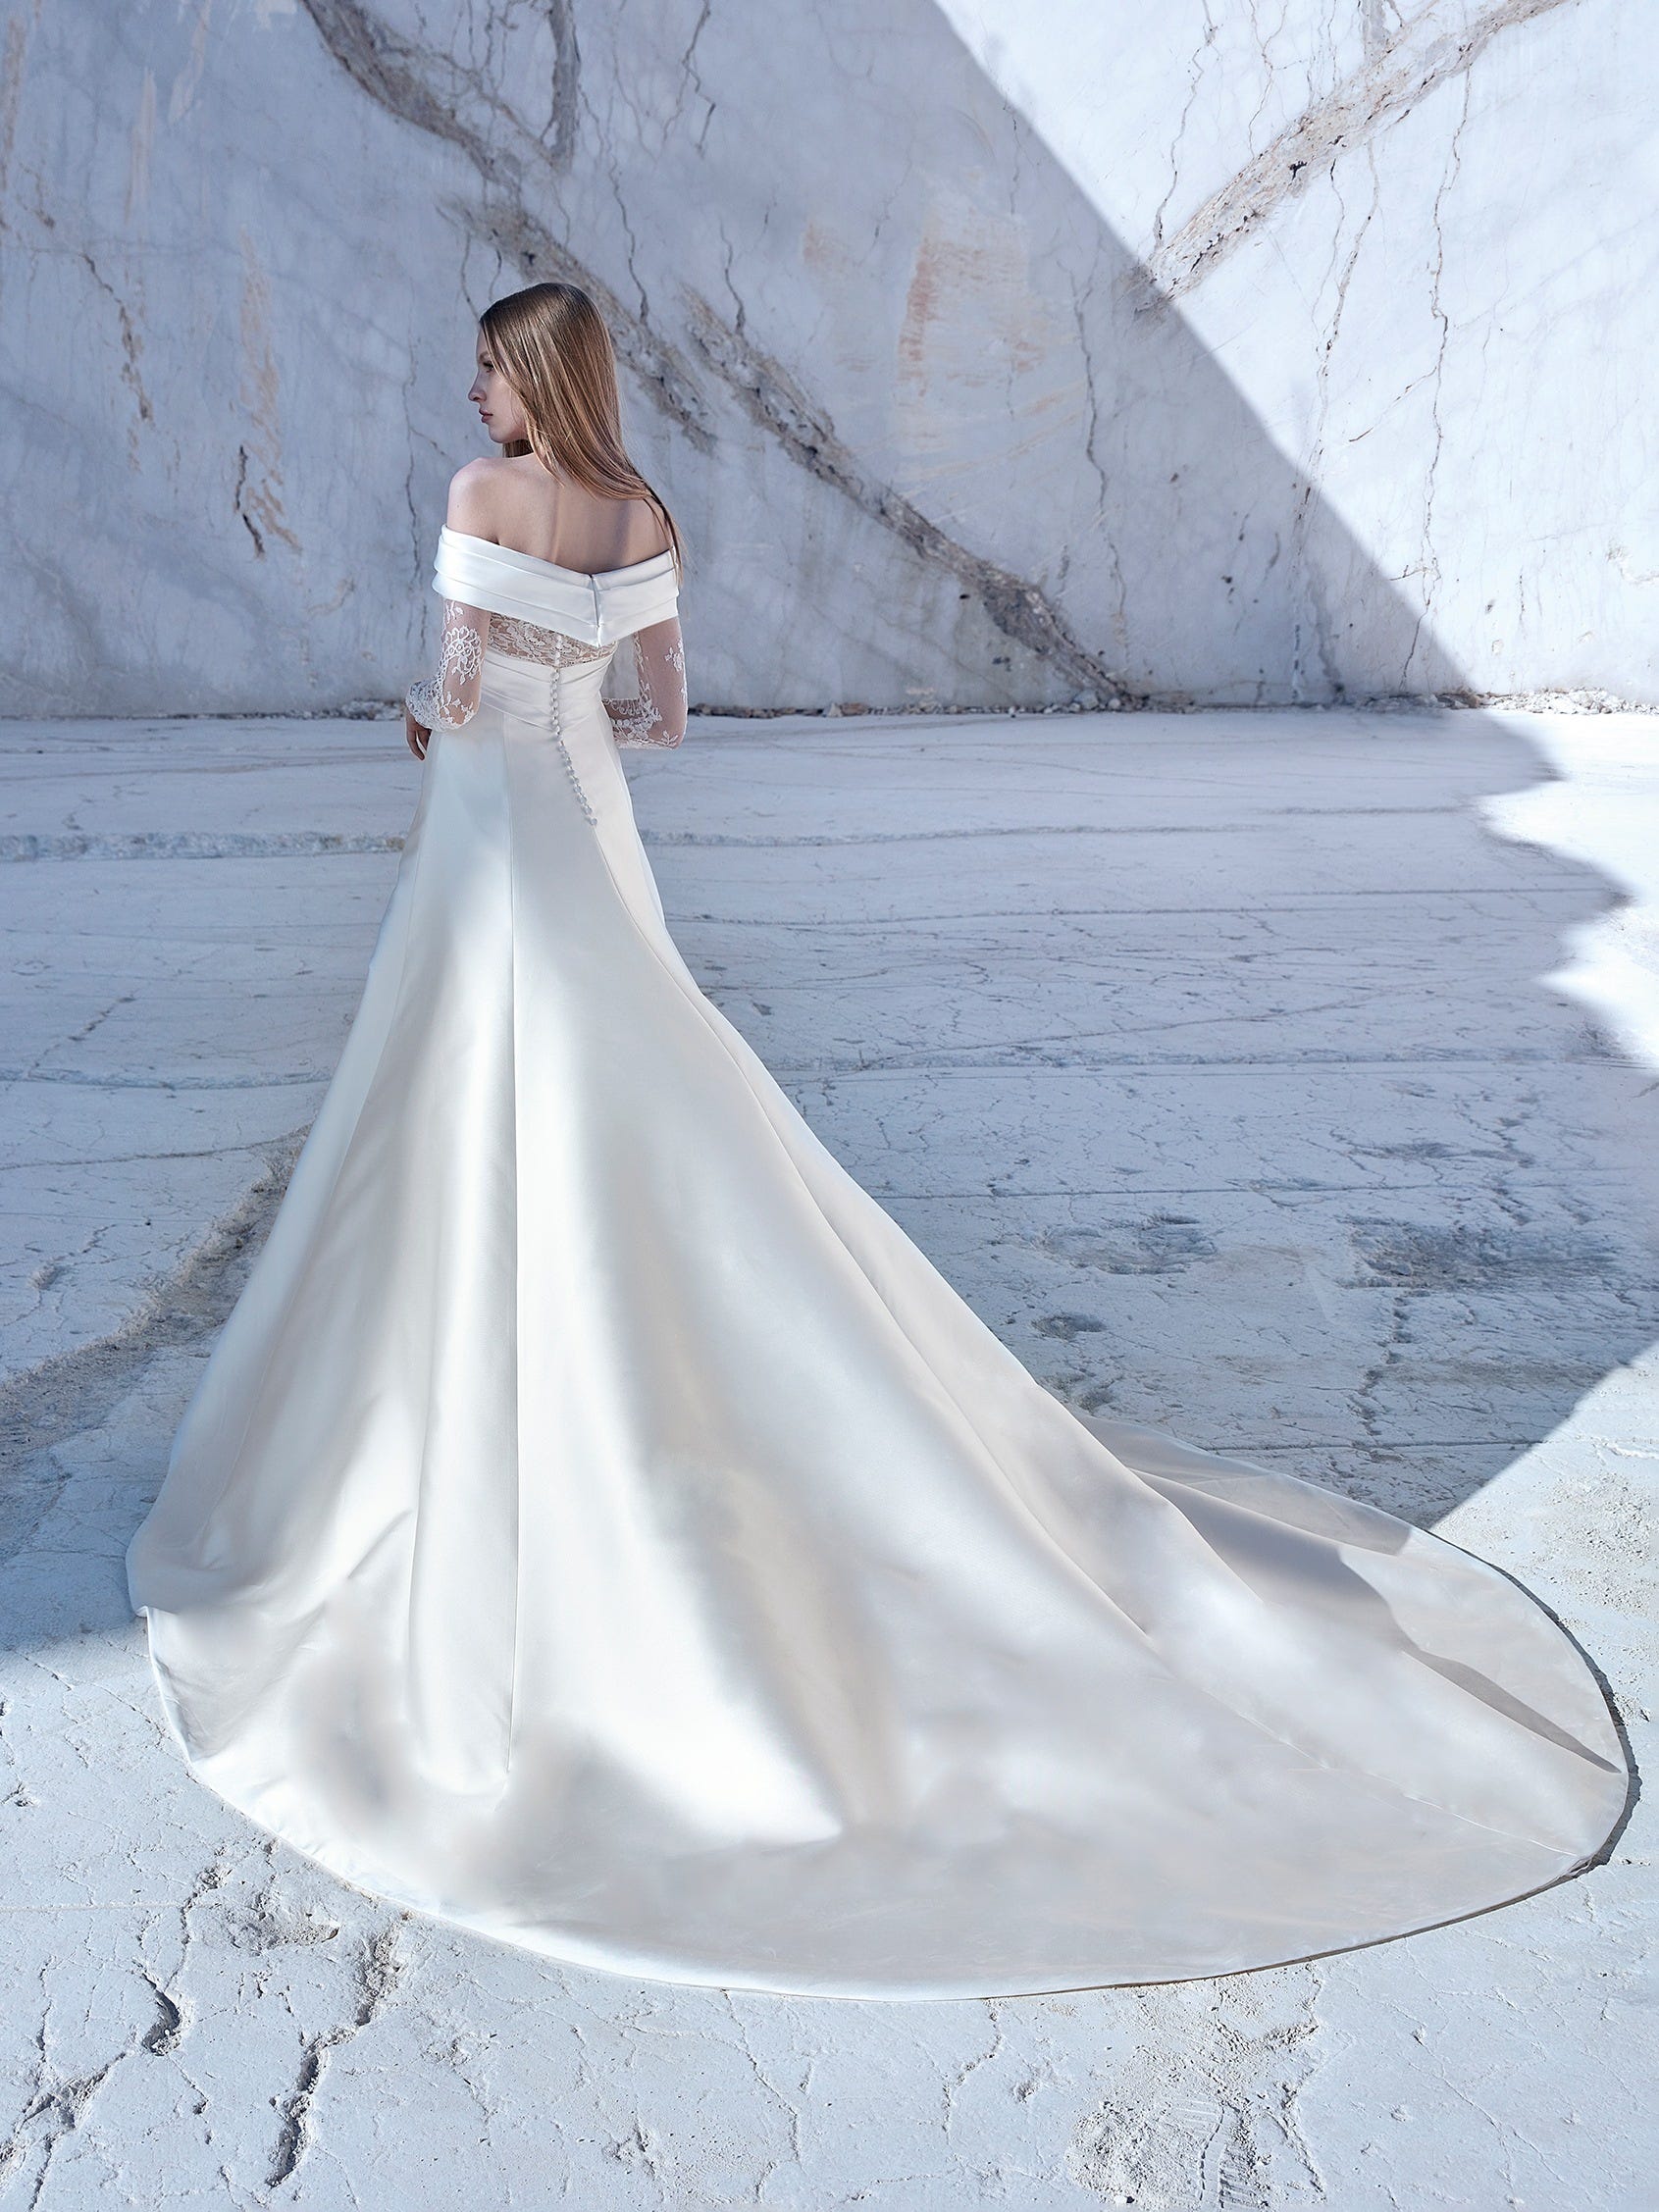 19 Magical Wedding Gowns For the Winter Fairy Tale Bride! - Praise Wedding